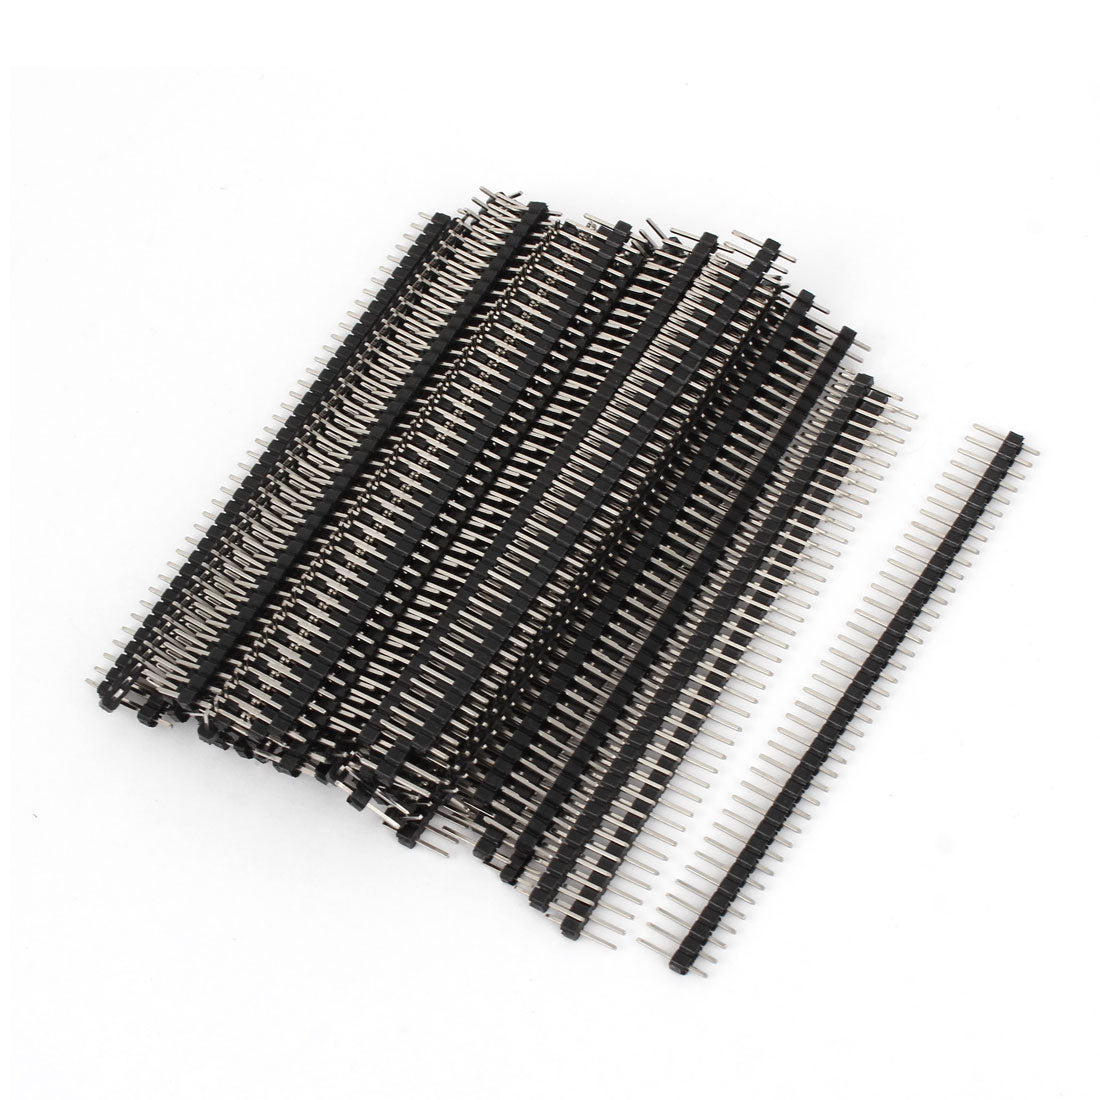 uxcell Uxcell 50pcs 2.54mm Spacing 40 Way Straight Male Pin Header Connector Strip